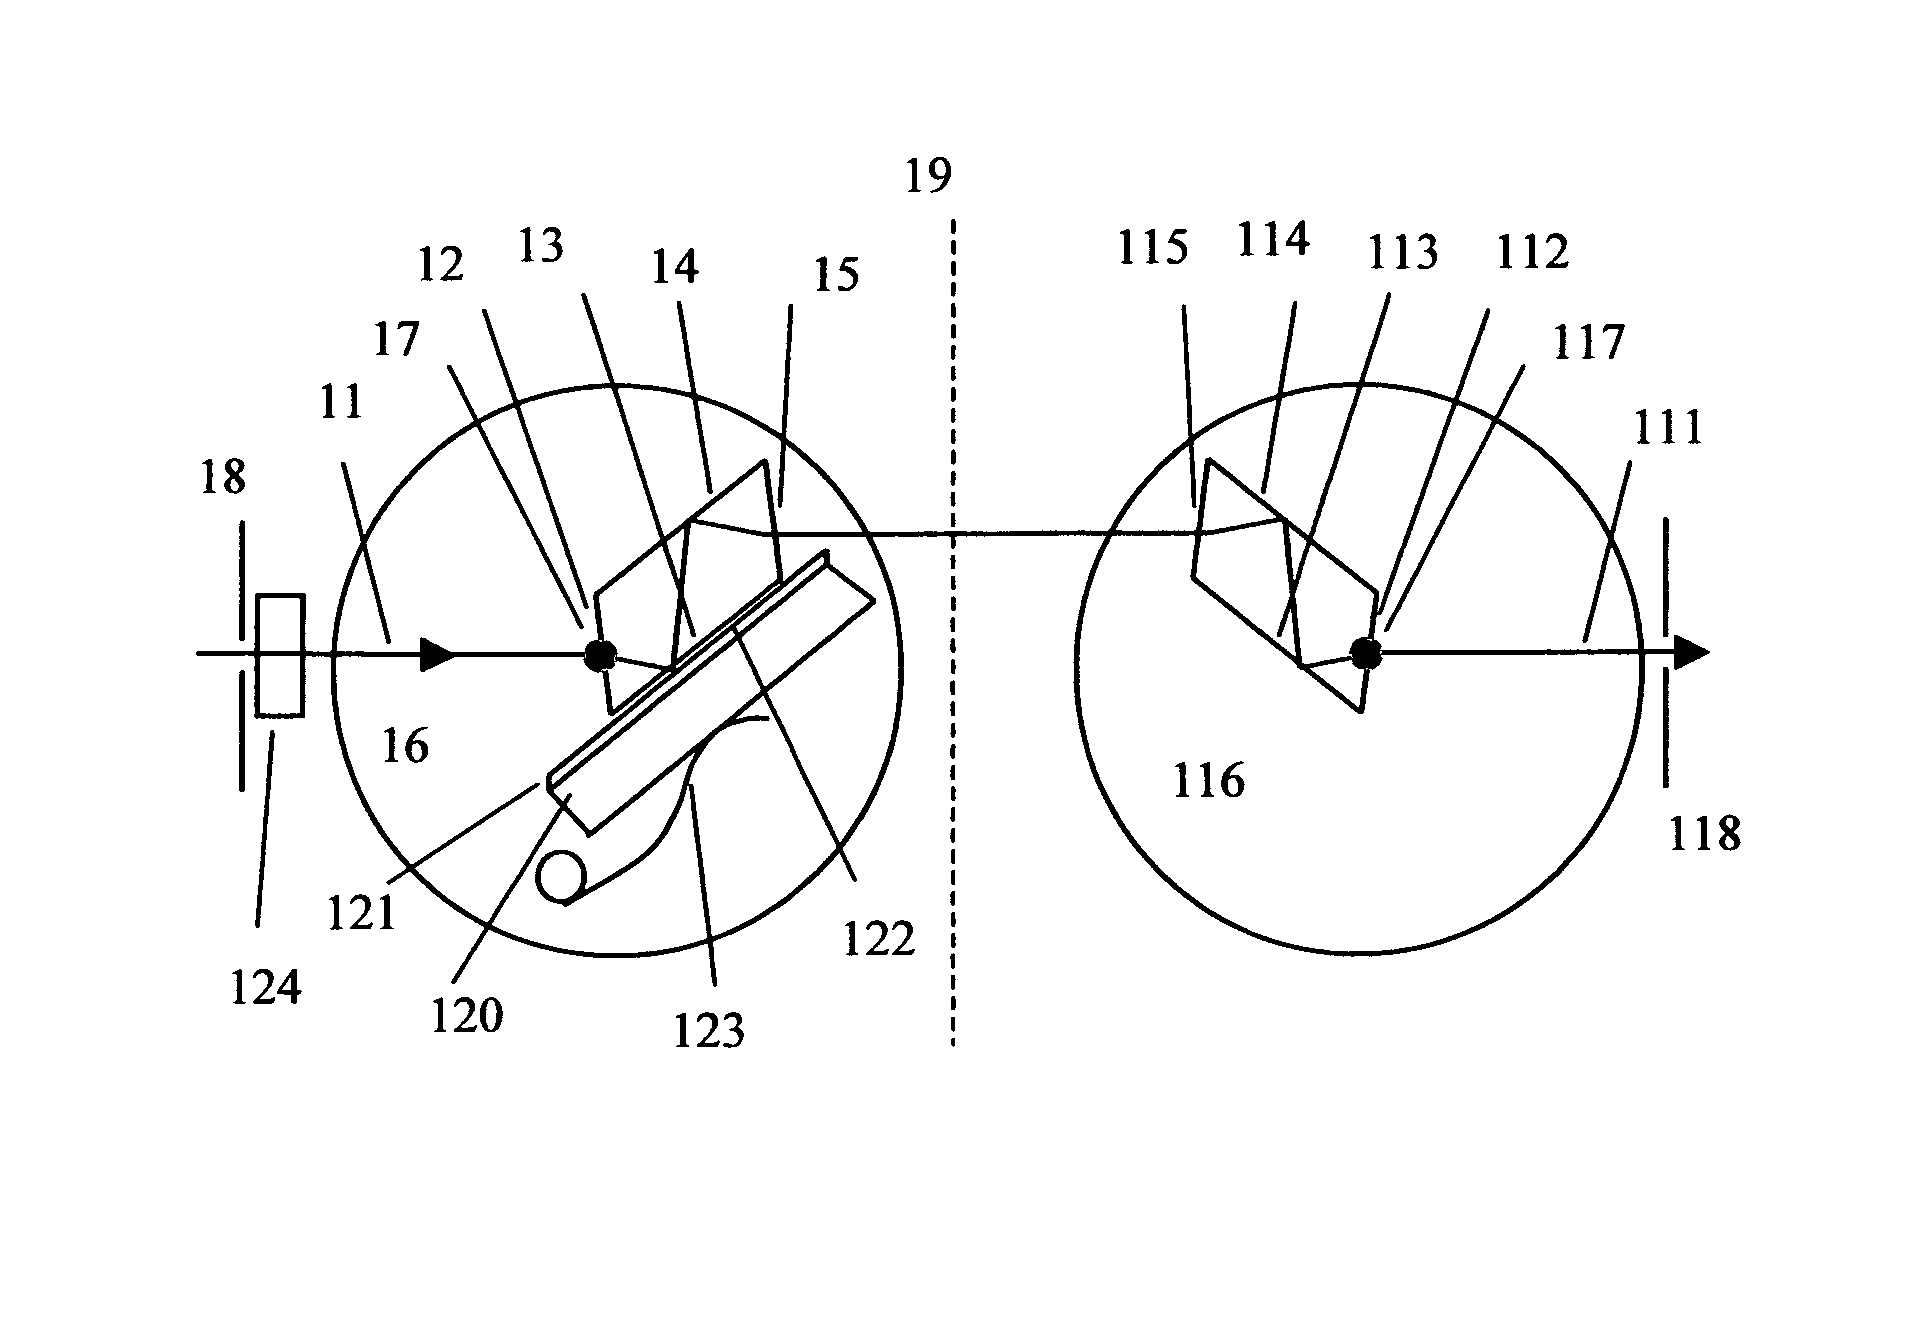 Apparatus for measuring thin film refractive index and thickness with a spectrophotometer